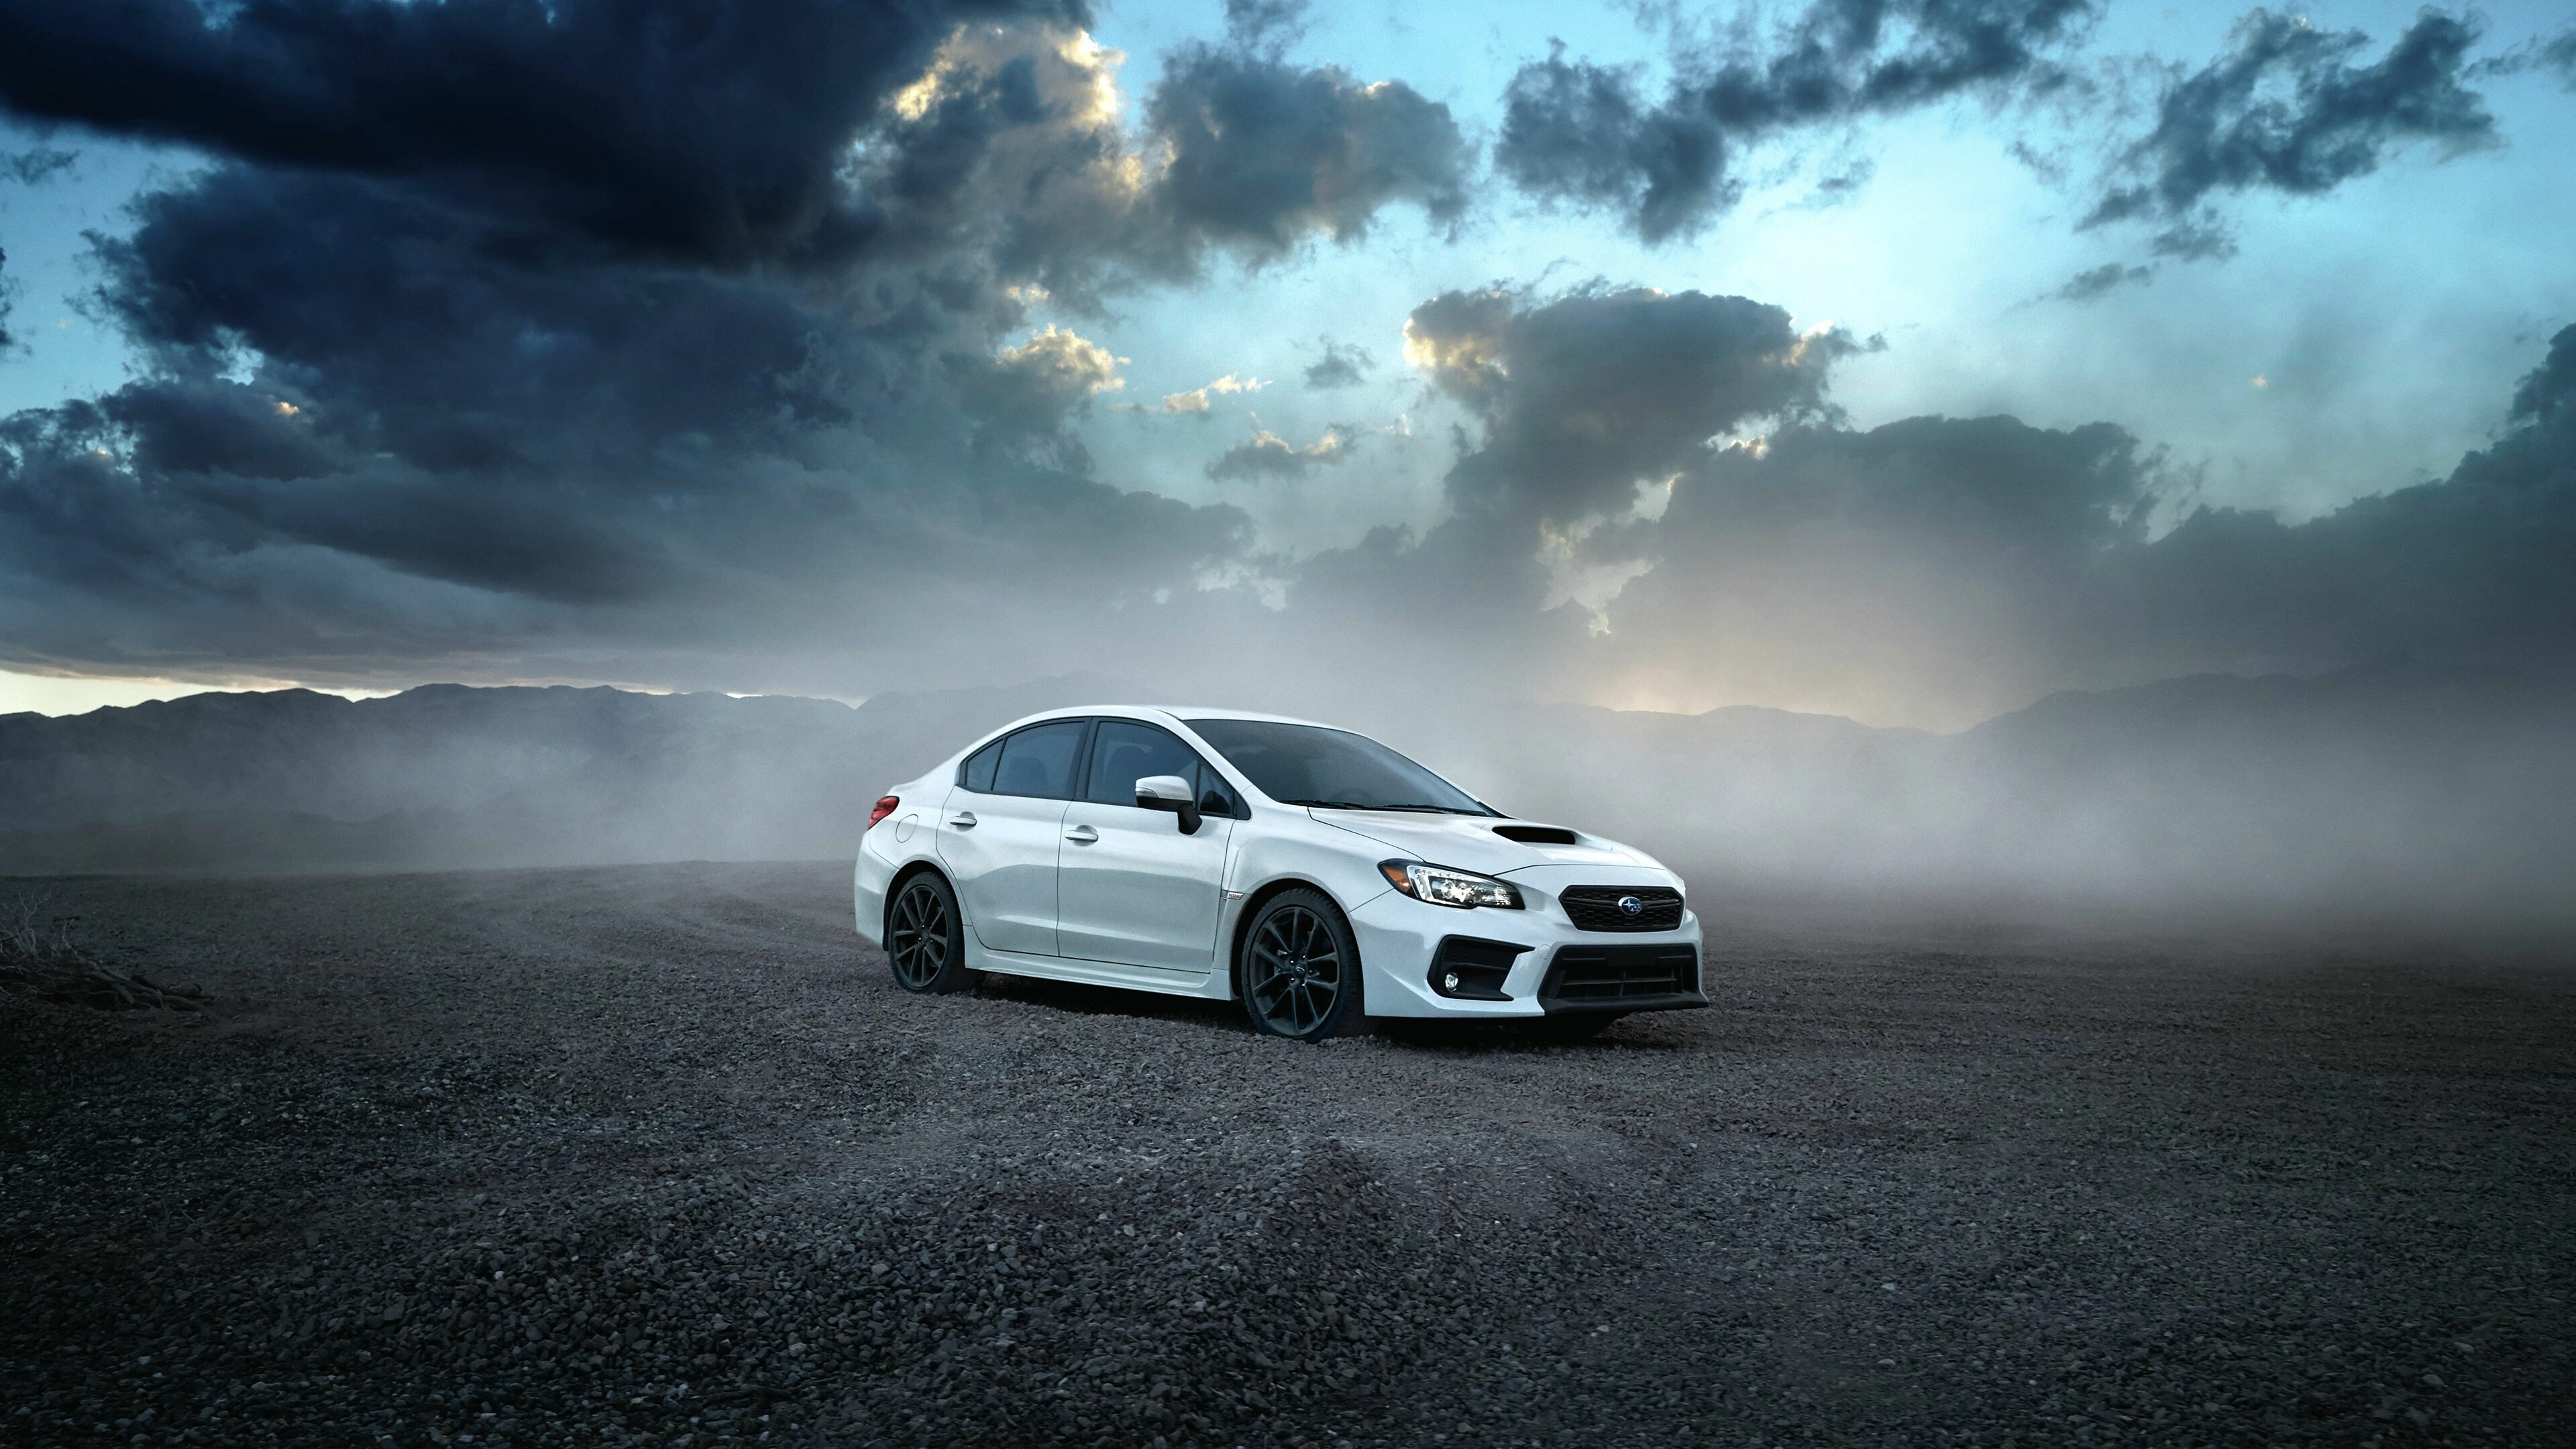 Subaru: WRX STI, An all-wheel-drive sport compact car manufactured by the Japanese automaker. 3840x2160 4K Background.